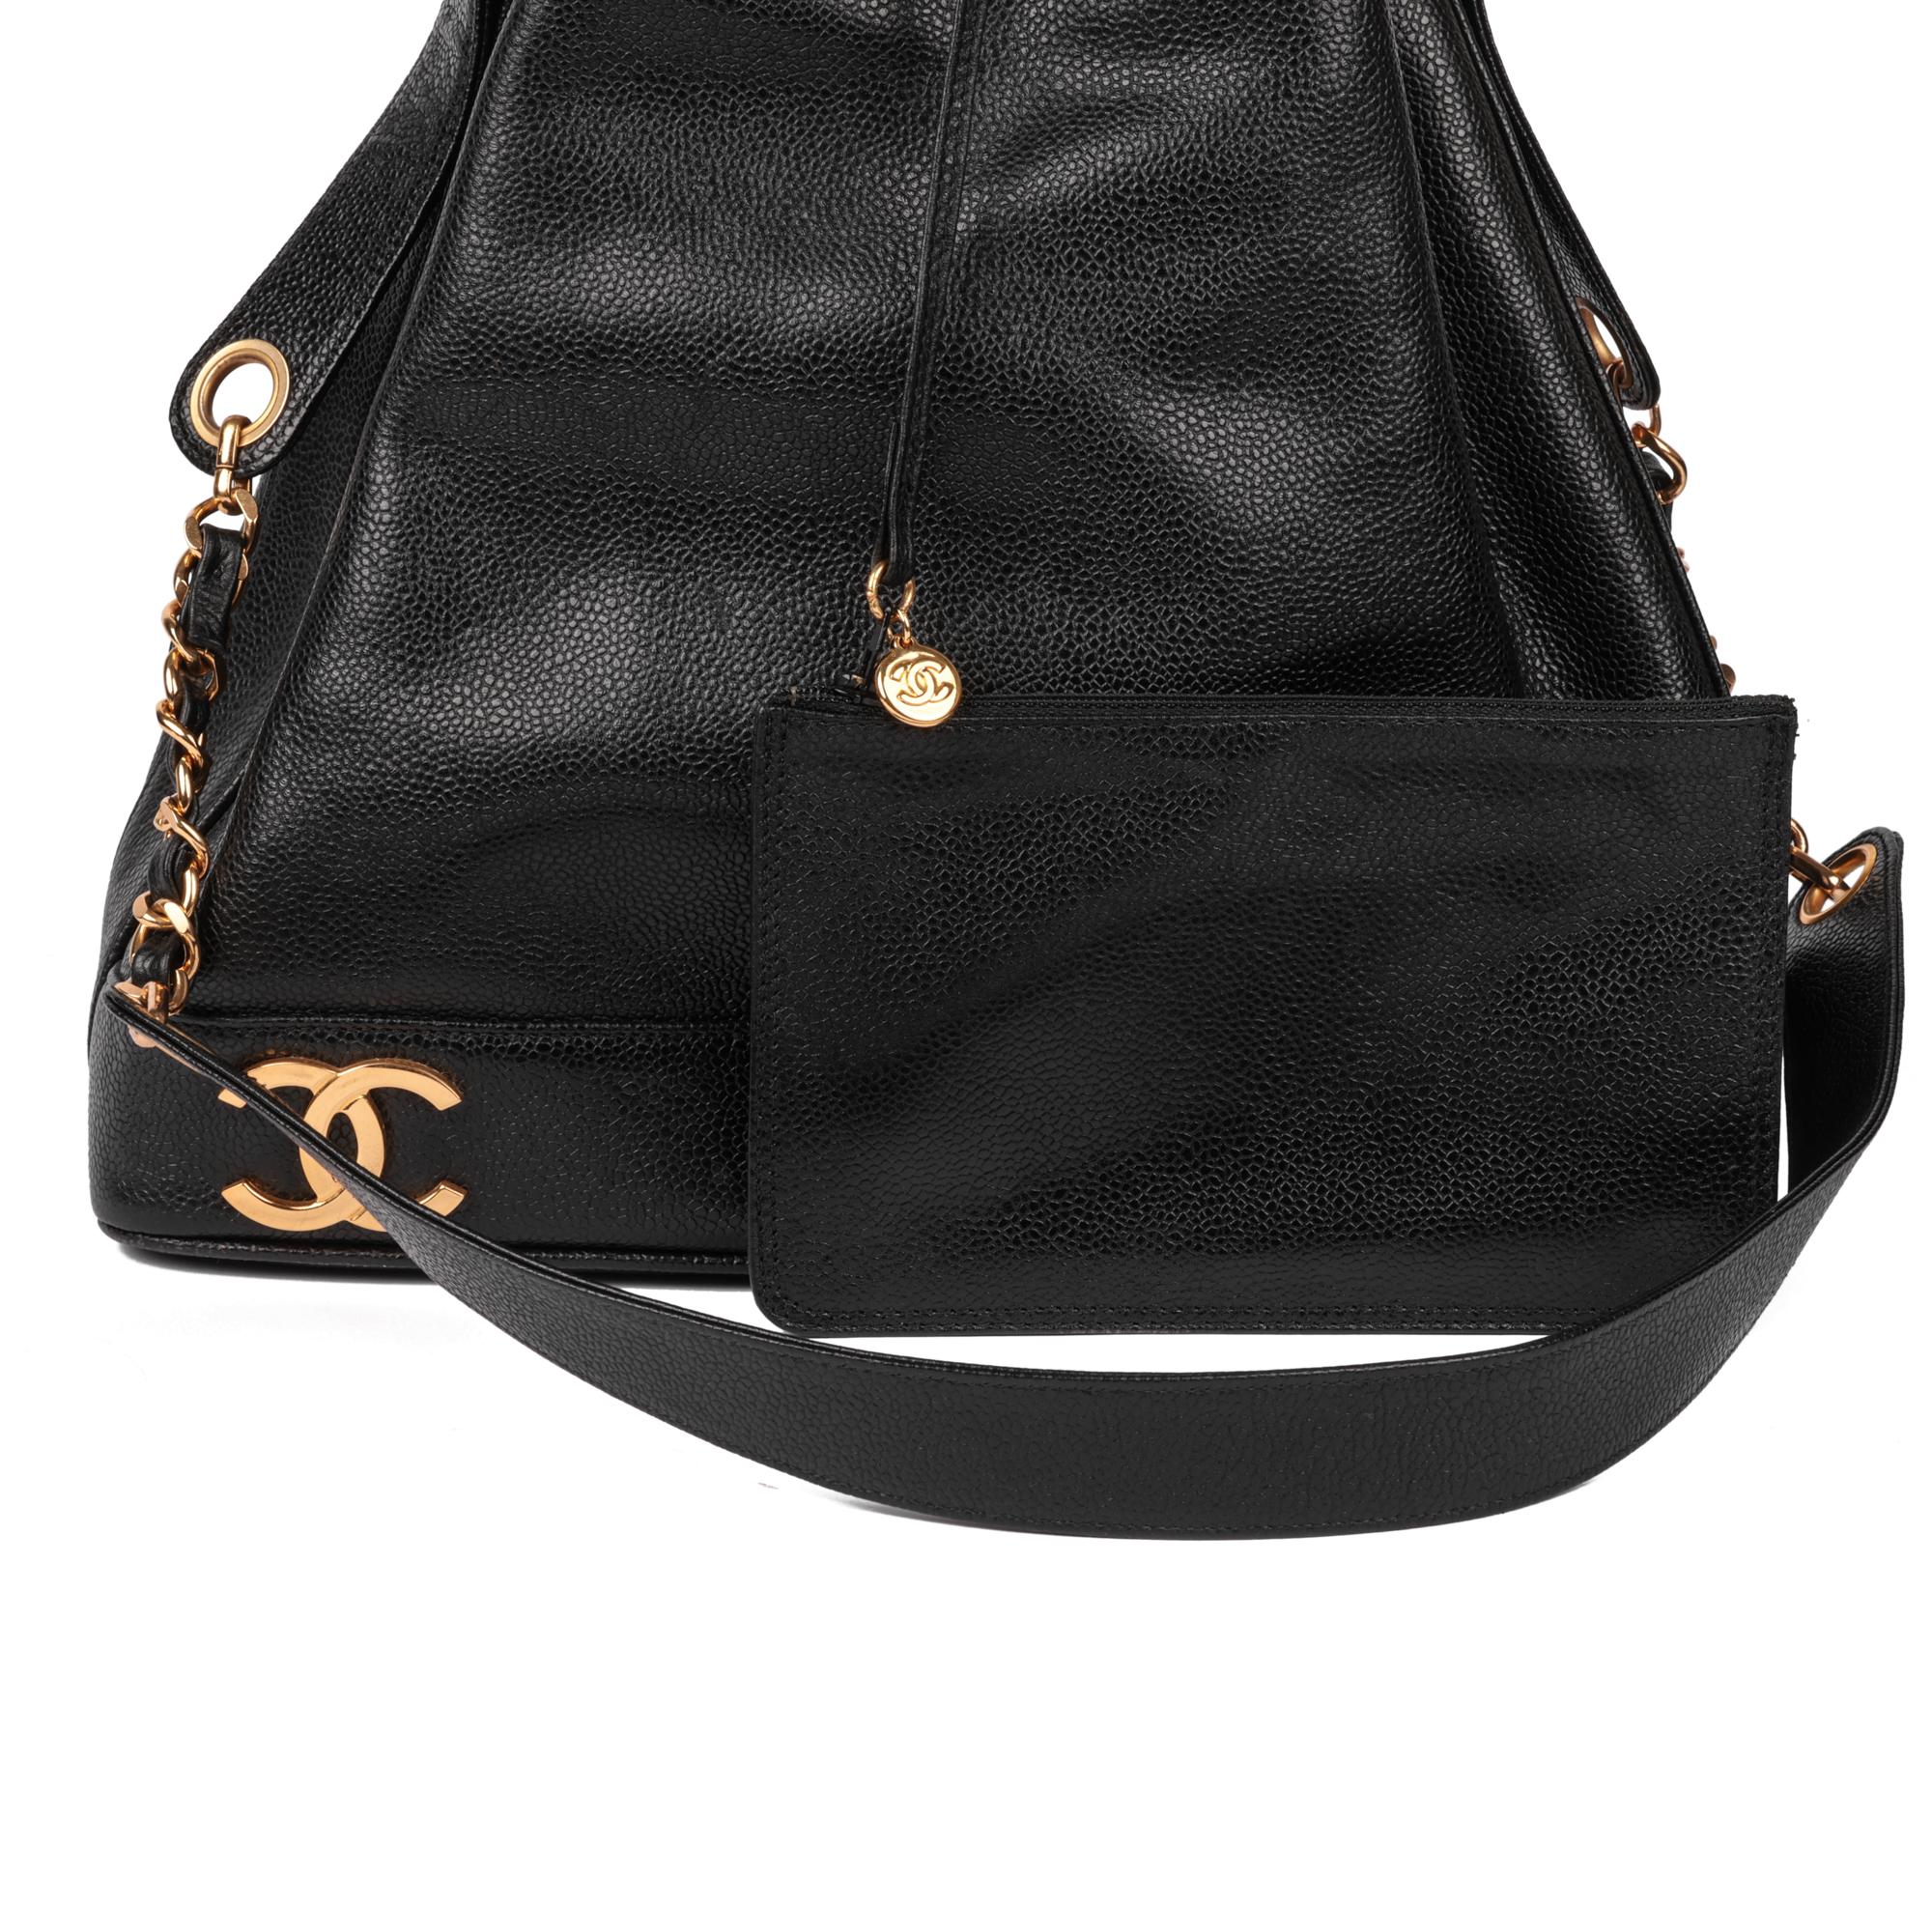 CHANEL Black Caviar Leather Vintage Classic Logo Trim Bucket Bag with Pouch 6